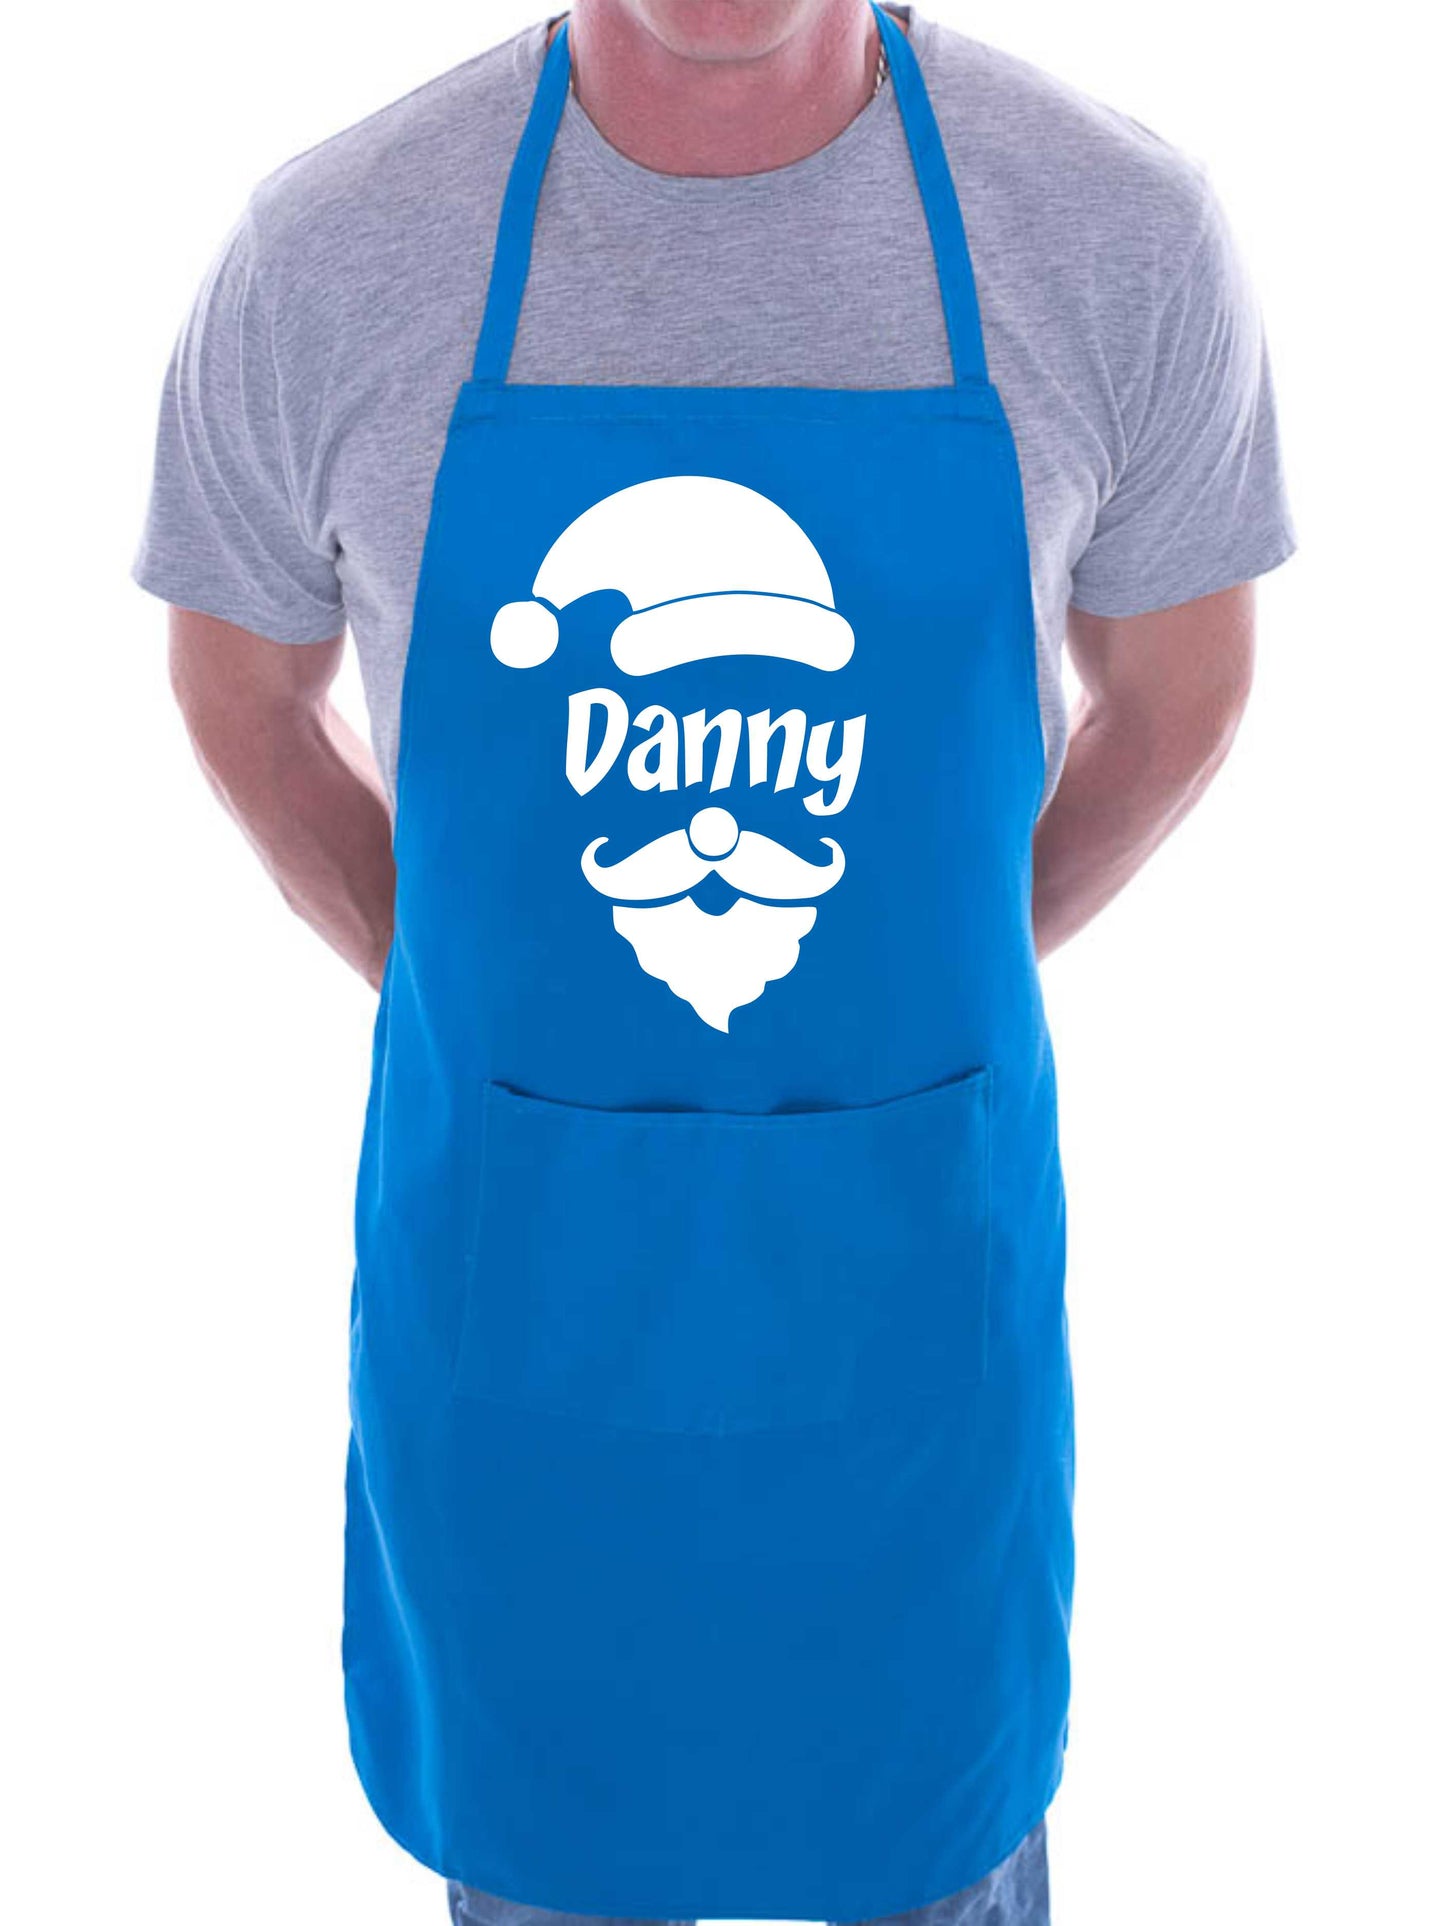 Personalised Christmas Funny Santa Apron Add Your Own Name Here Great Xmas Gift